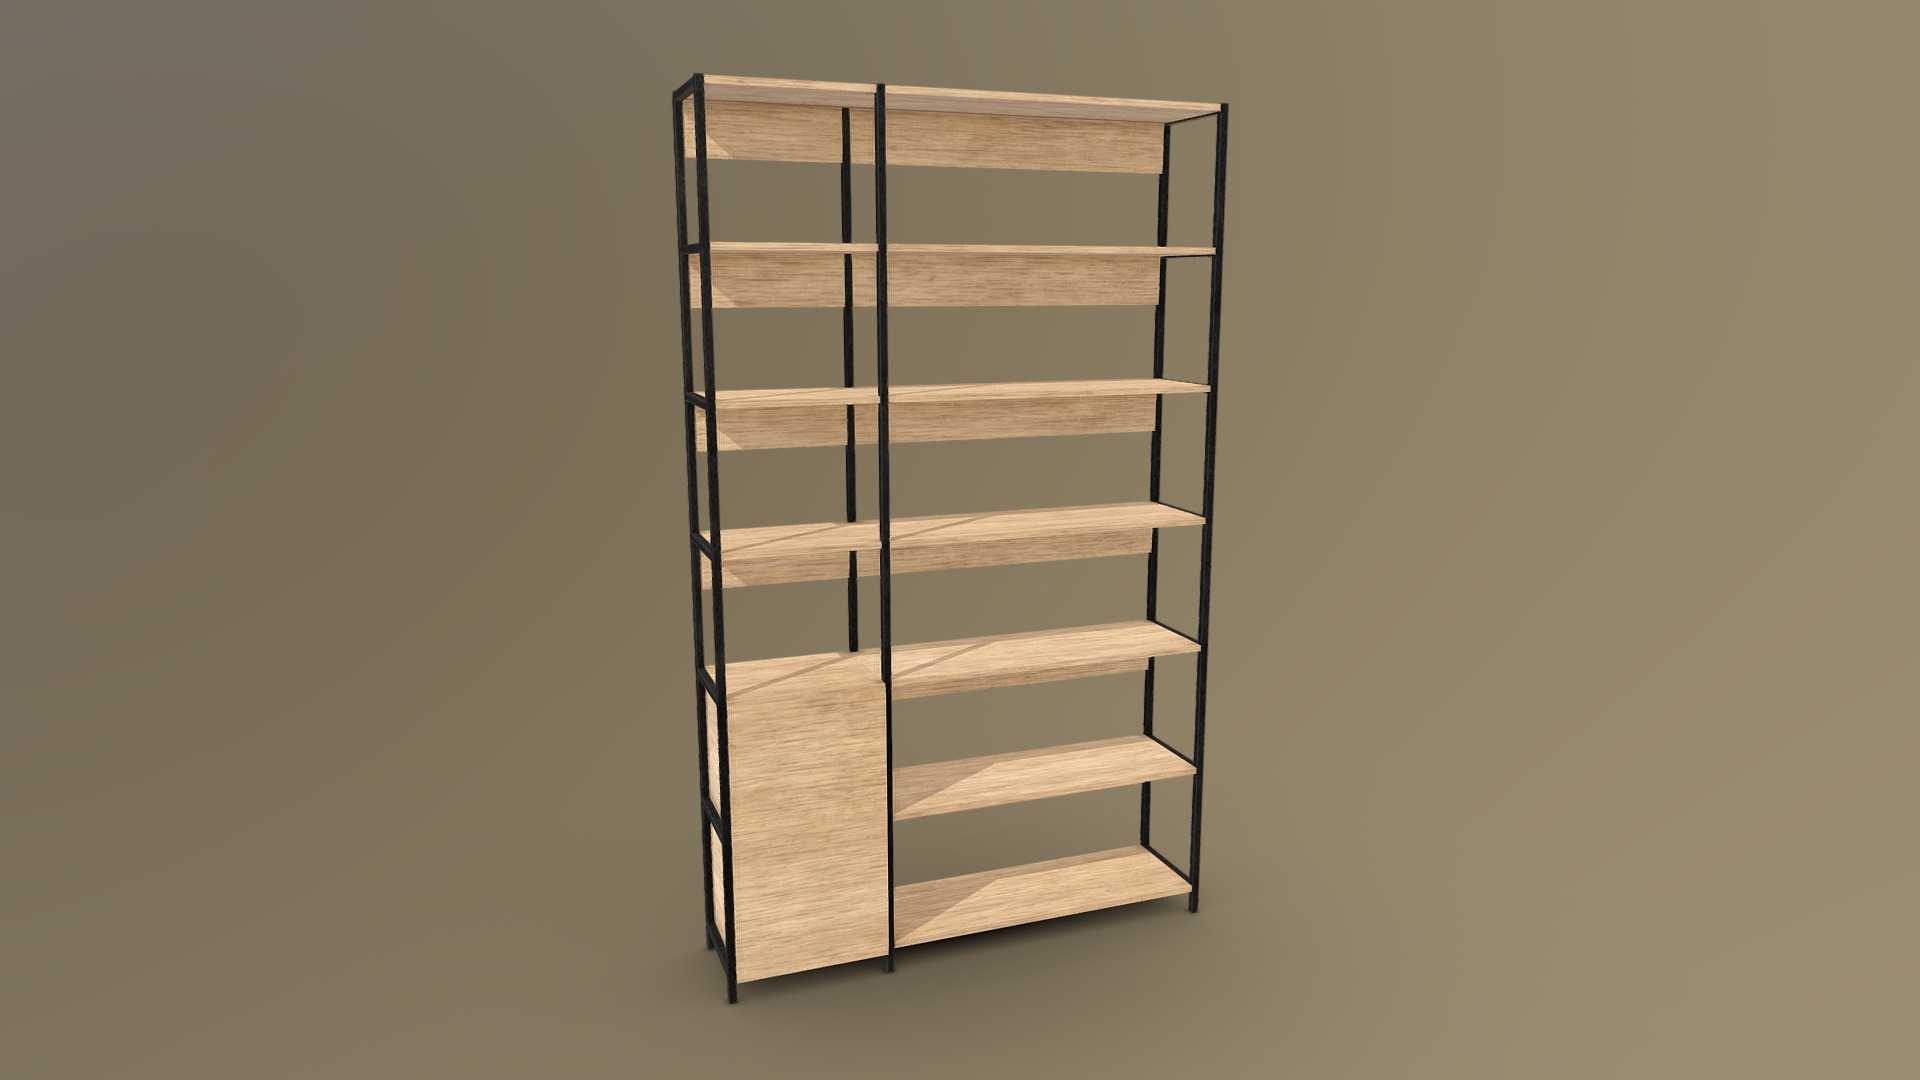 Generic, unbranded modern shelving design. Suitable for your next furniture / architecture / interior design project.

Also available as part of our 15 item asset pack: https://sketchfab.com/models/0fc4efd9f5f44faa98eece686d8cb890 - Bookshelf / Shelf / Shelving - Buy Royalty Free 3D model by Virtual Studio (@virtualstudio) 3d model